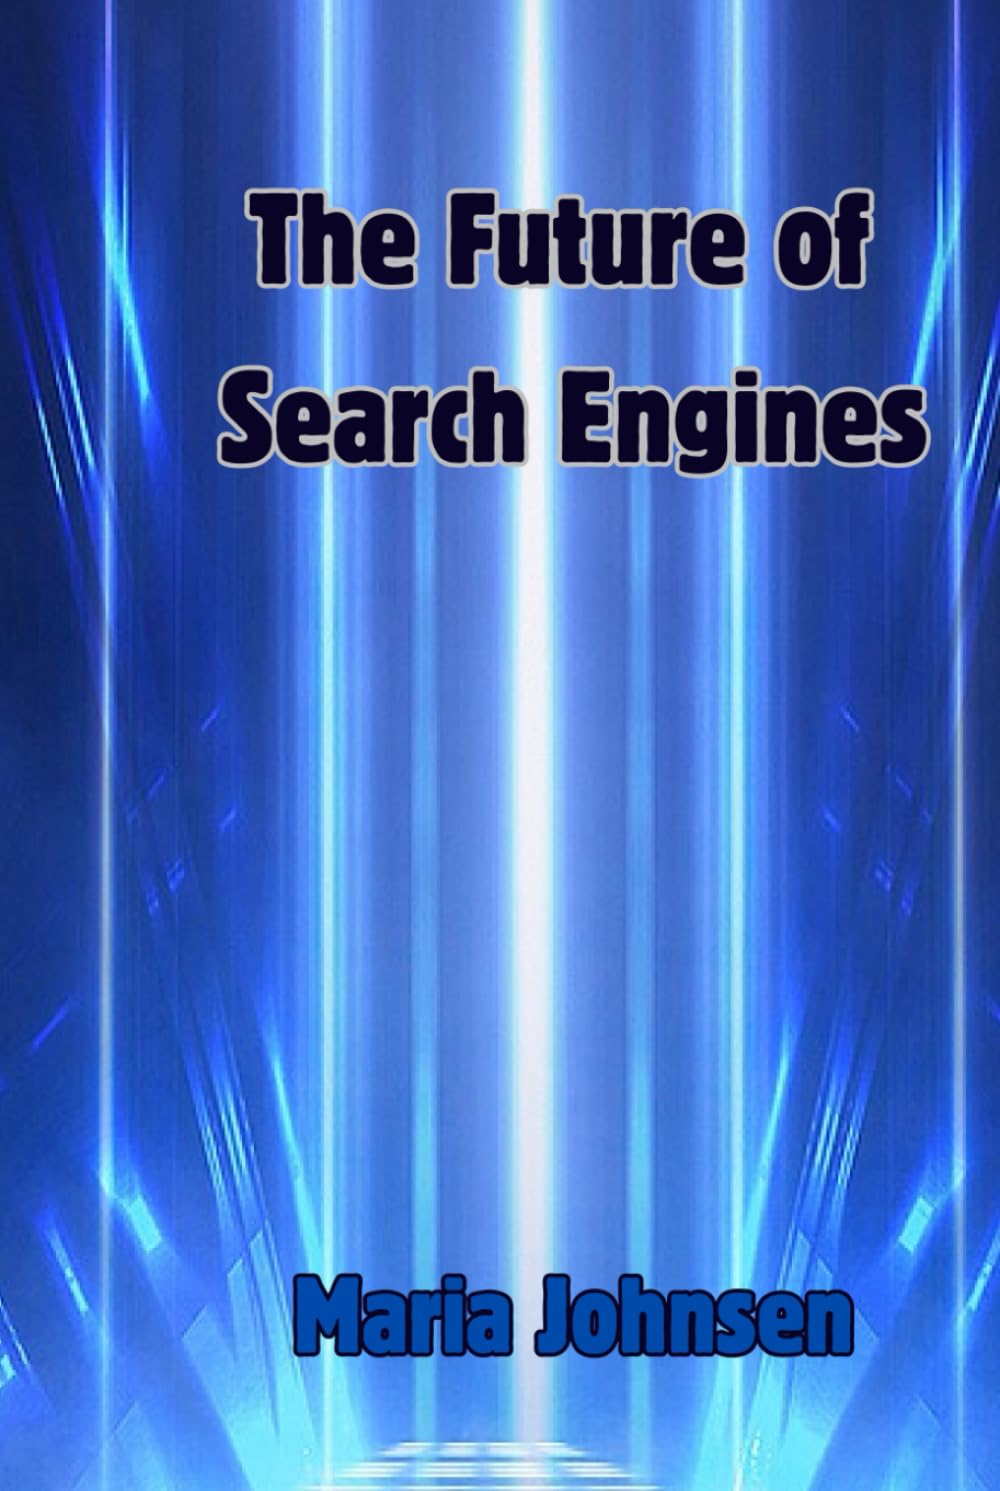 The Future of Search Engines